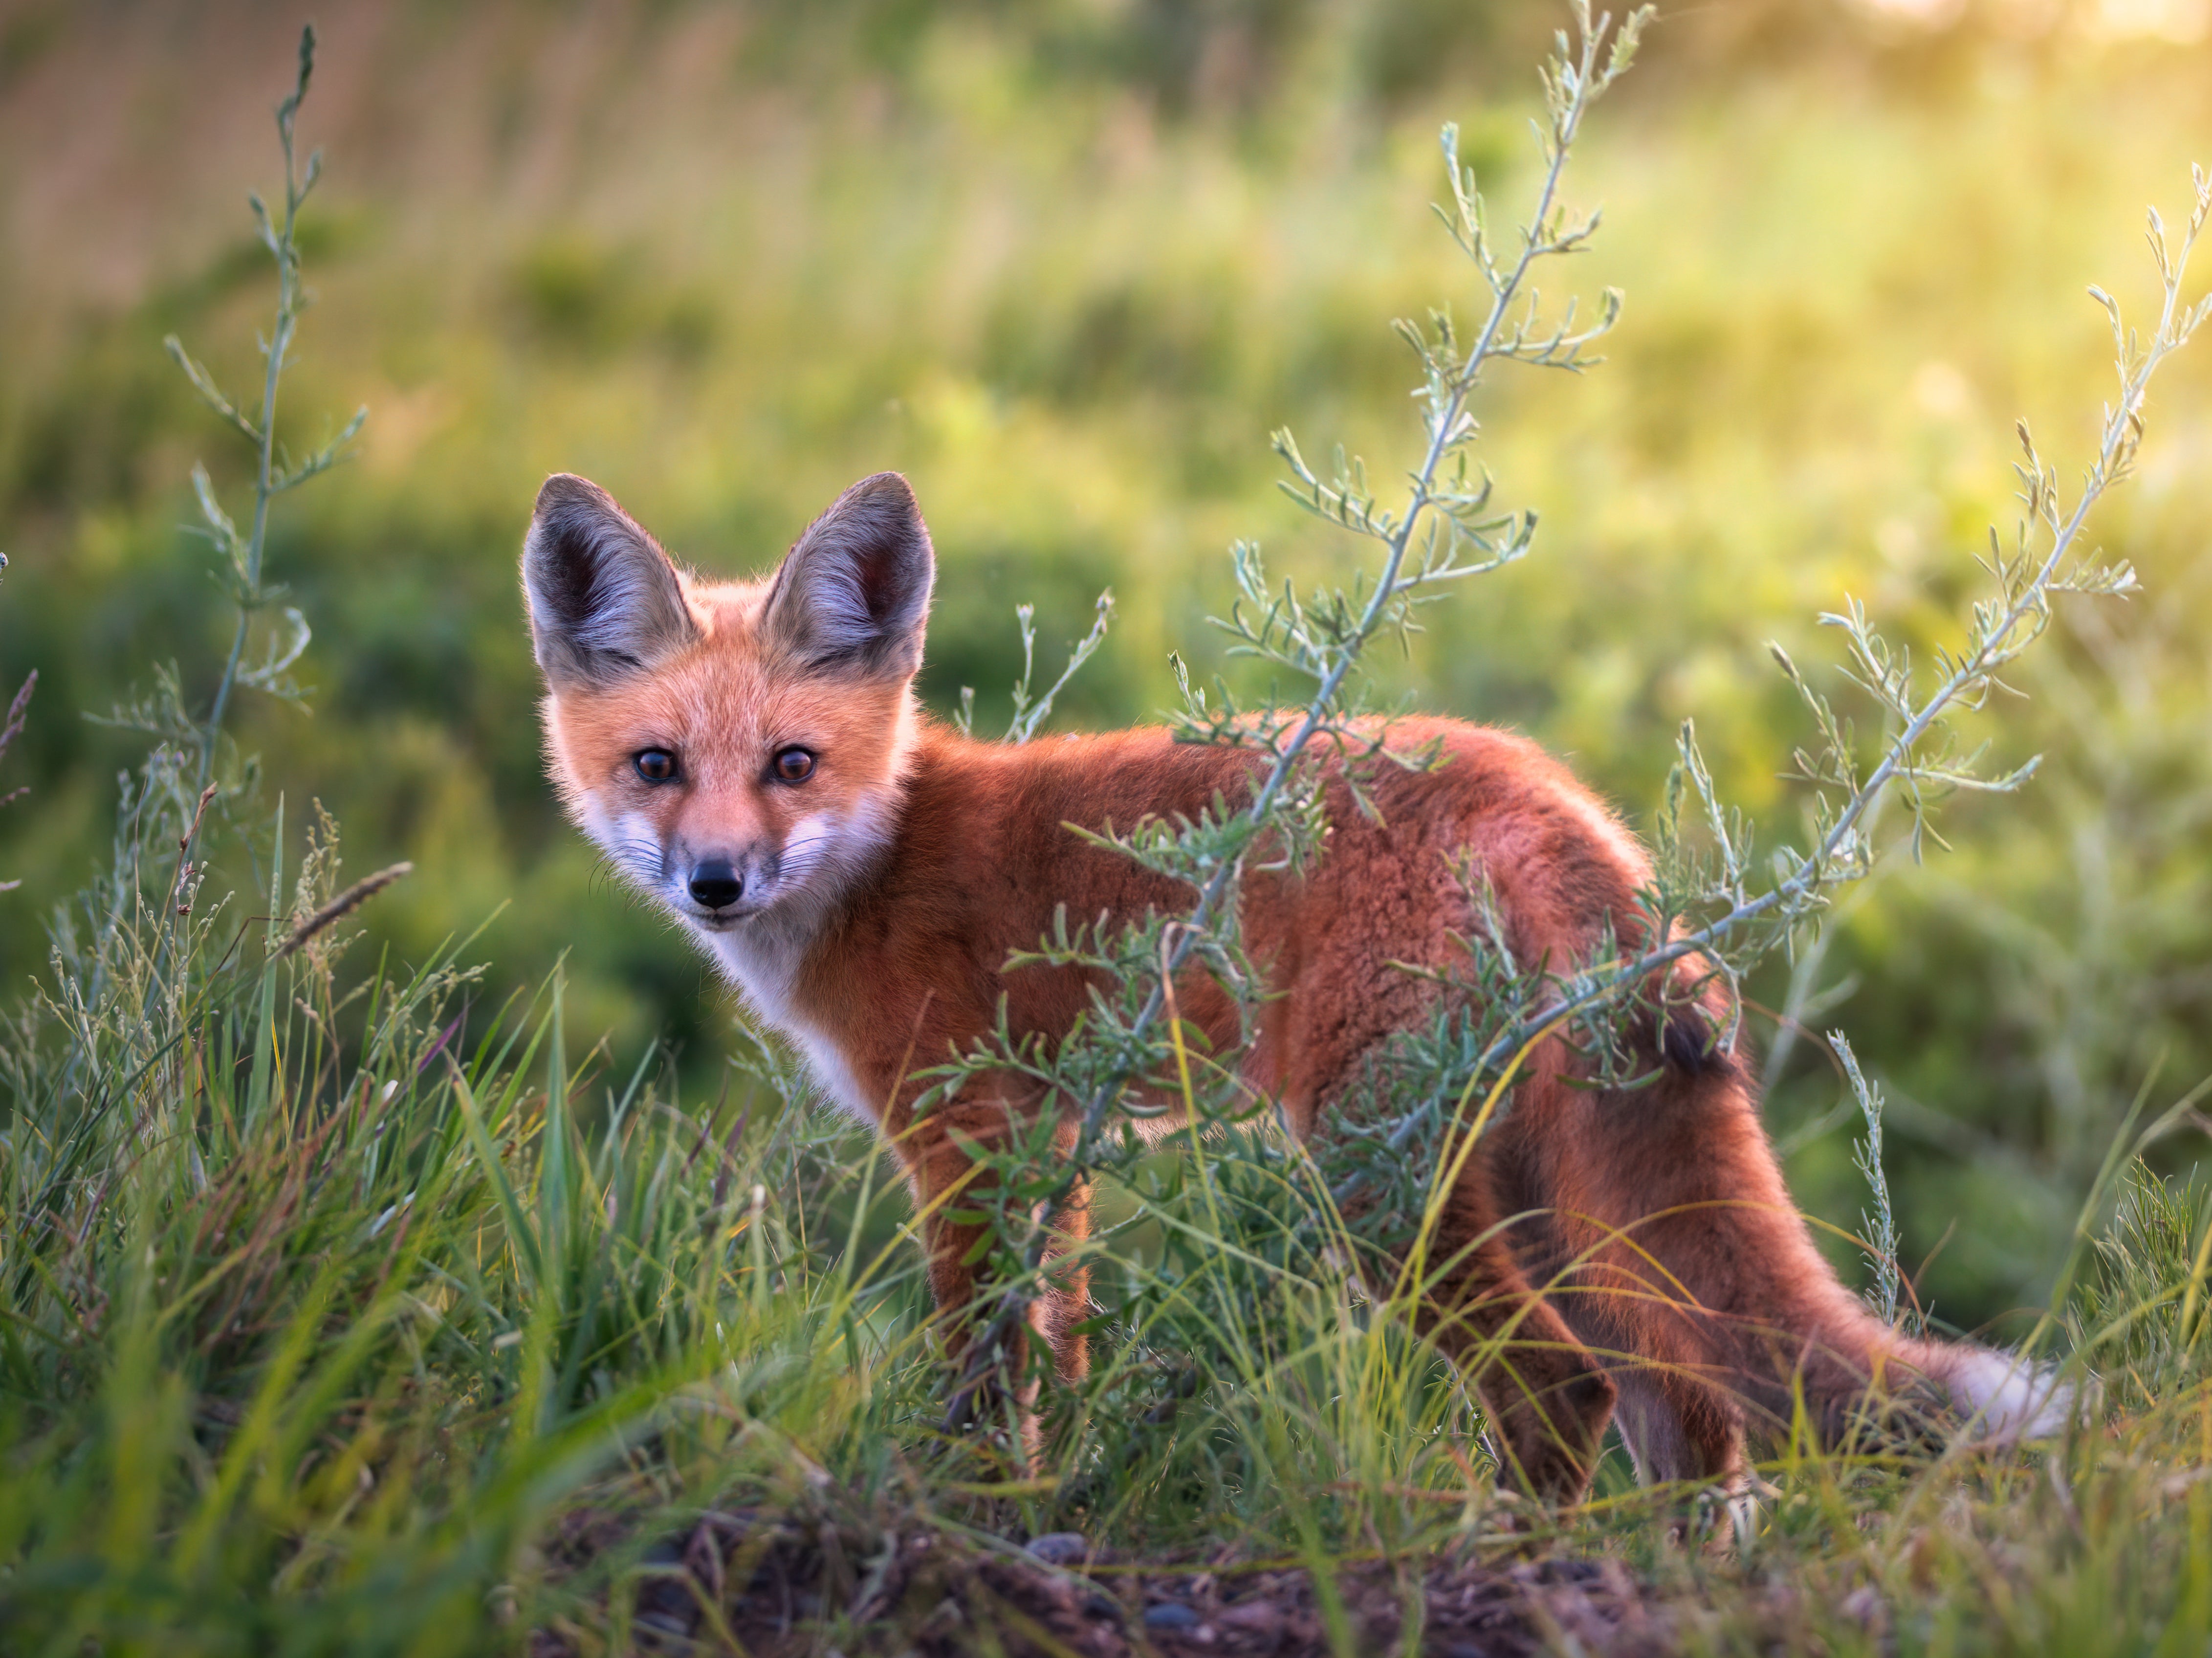 Foxes are subjected to a level of cruelty probably above any other native species